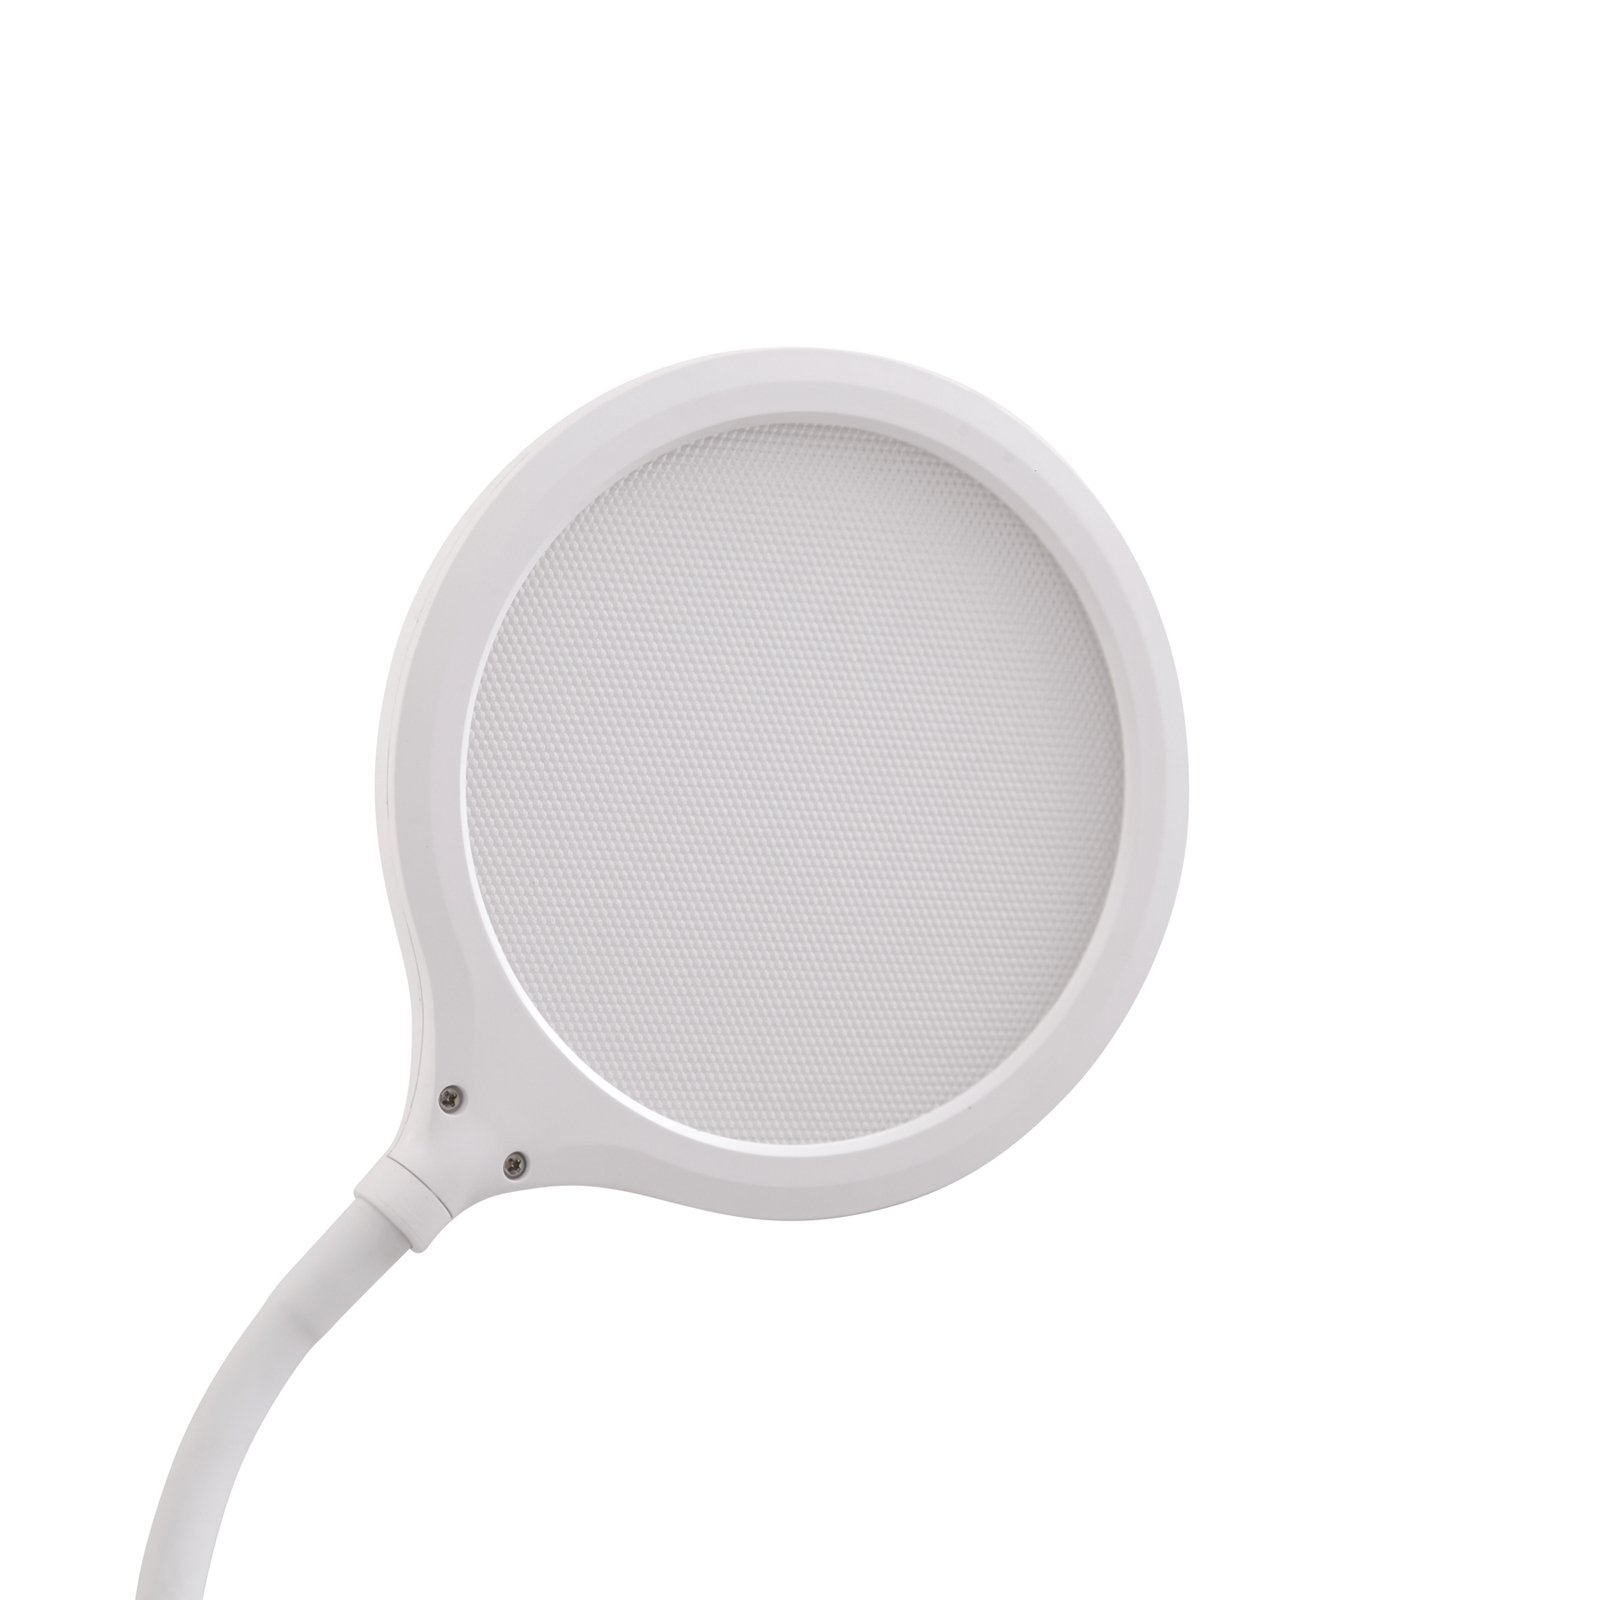 Lindby Valtaria lampe de table LED, CCT, blanche